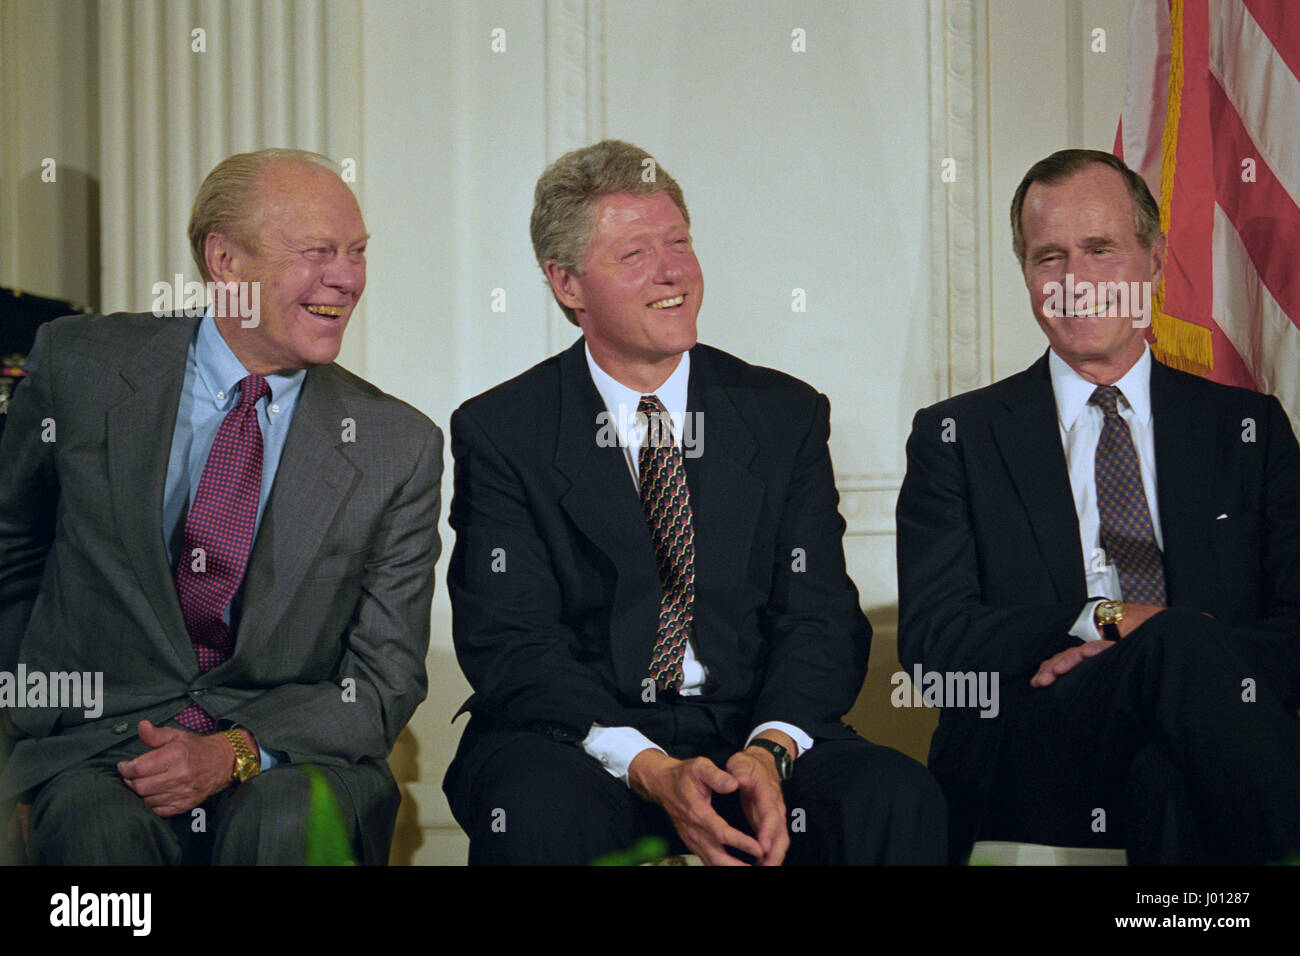 U.S President Bill Clinton shares a laugh with former Presidents George H.W. Bush, right, and Gerald Ford, left, at kick off ceremony for NAFTA in the East Room of the White House September 14, 1993 in Washington, DC. The North American Free Trade Agreement was proposed by President Ford, negotiations began under President Bush and were finalized by President Clinton. Stock Photo